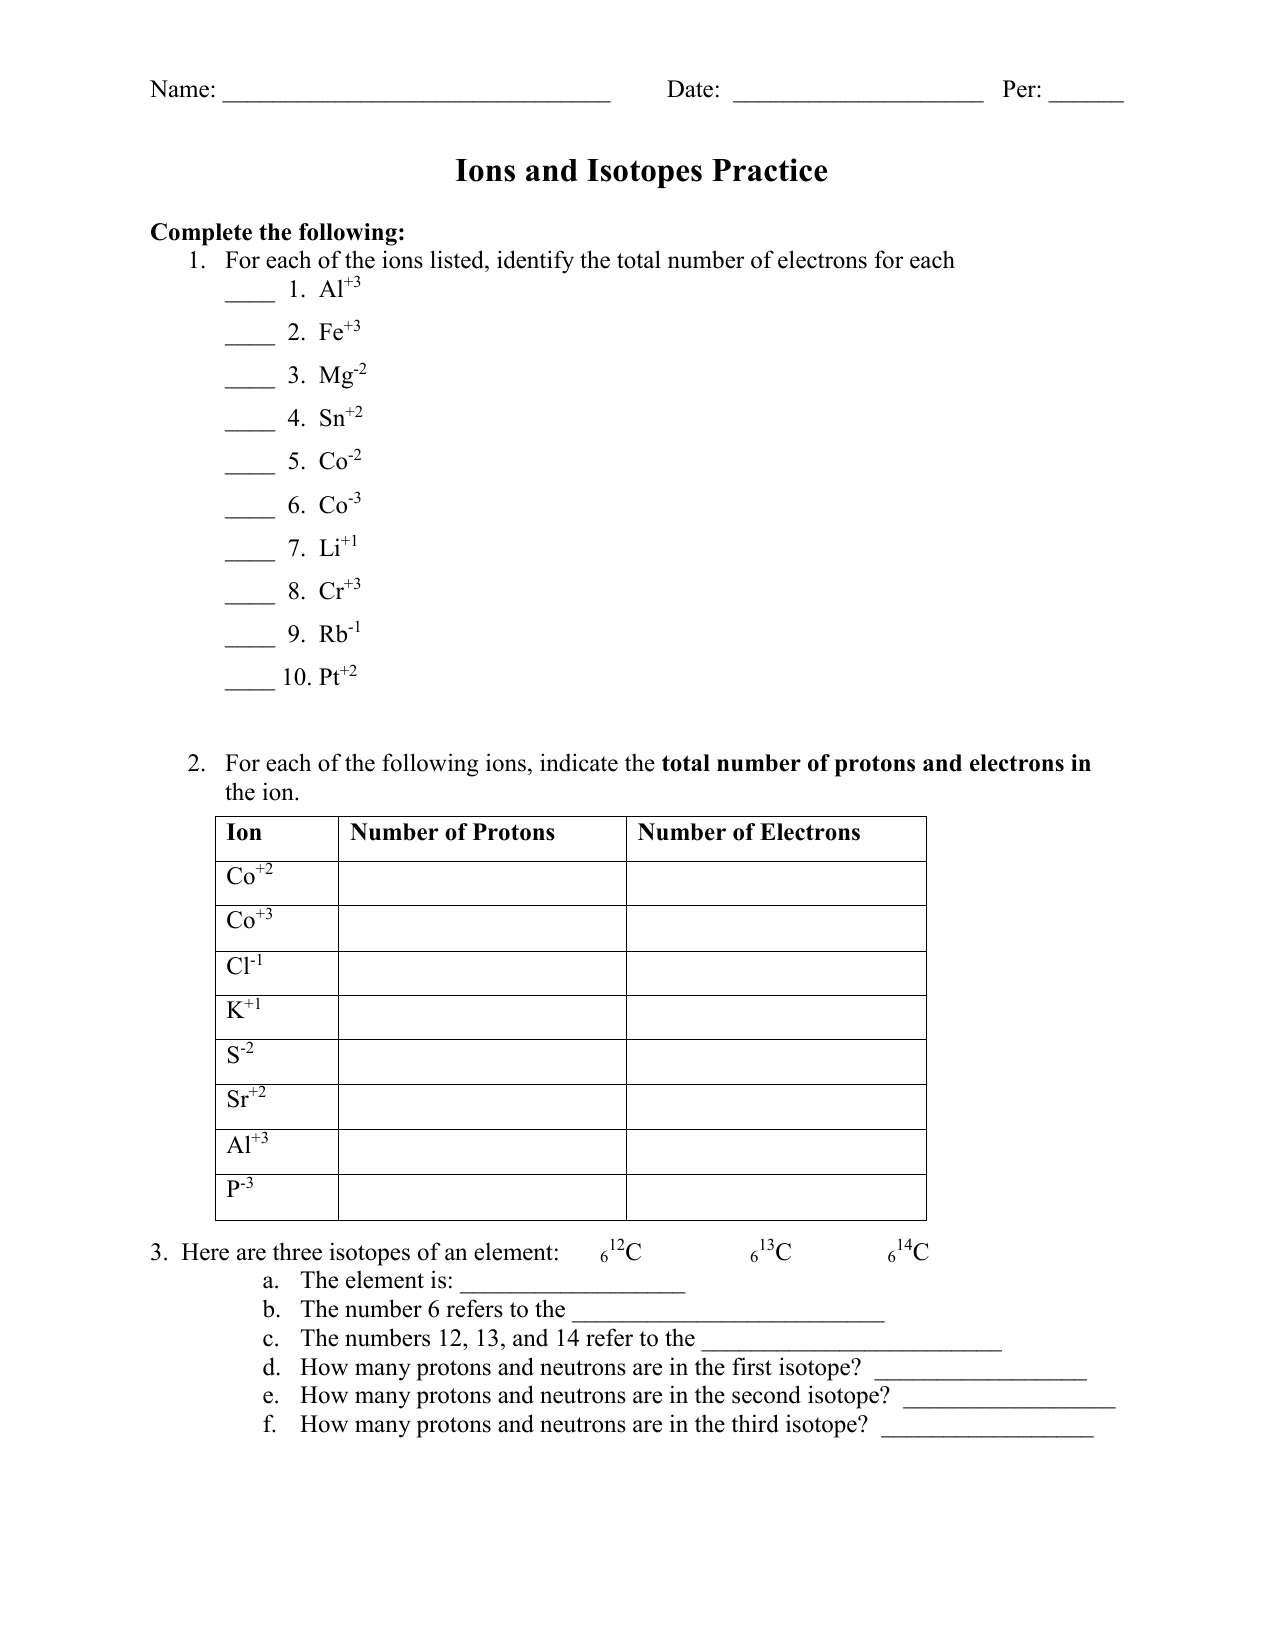 Ions and Isotopes Practice With Ions And Isotopes Worksheet